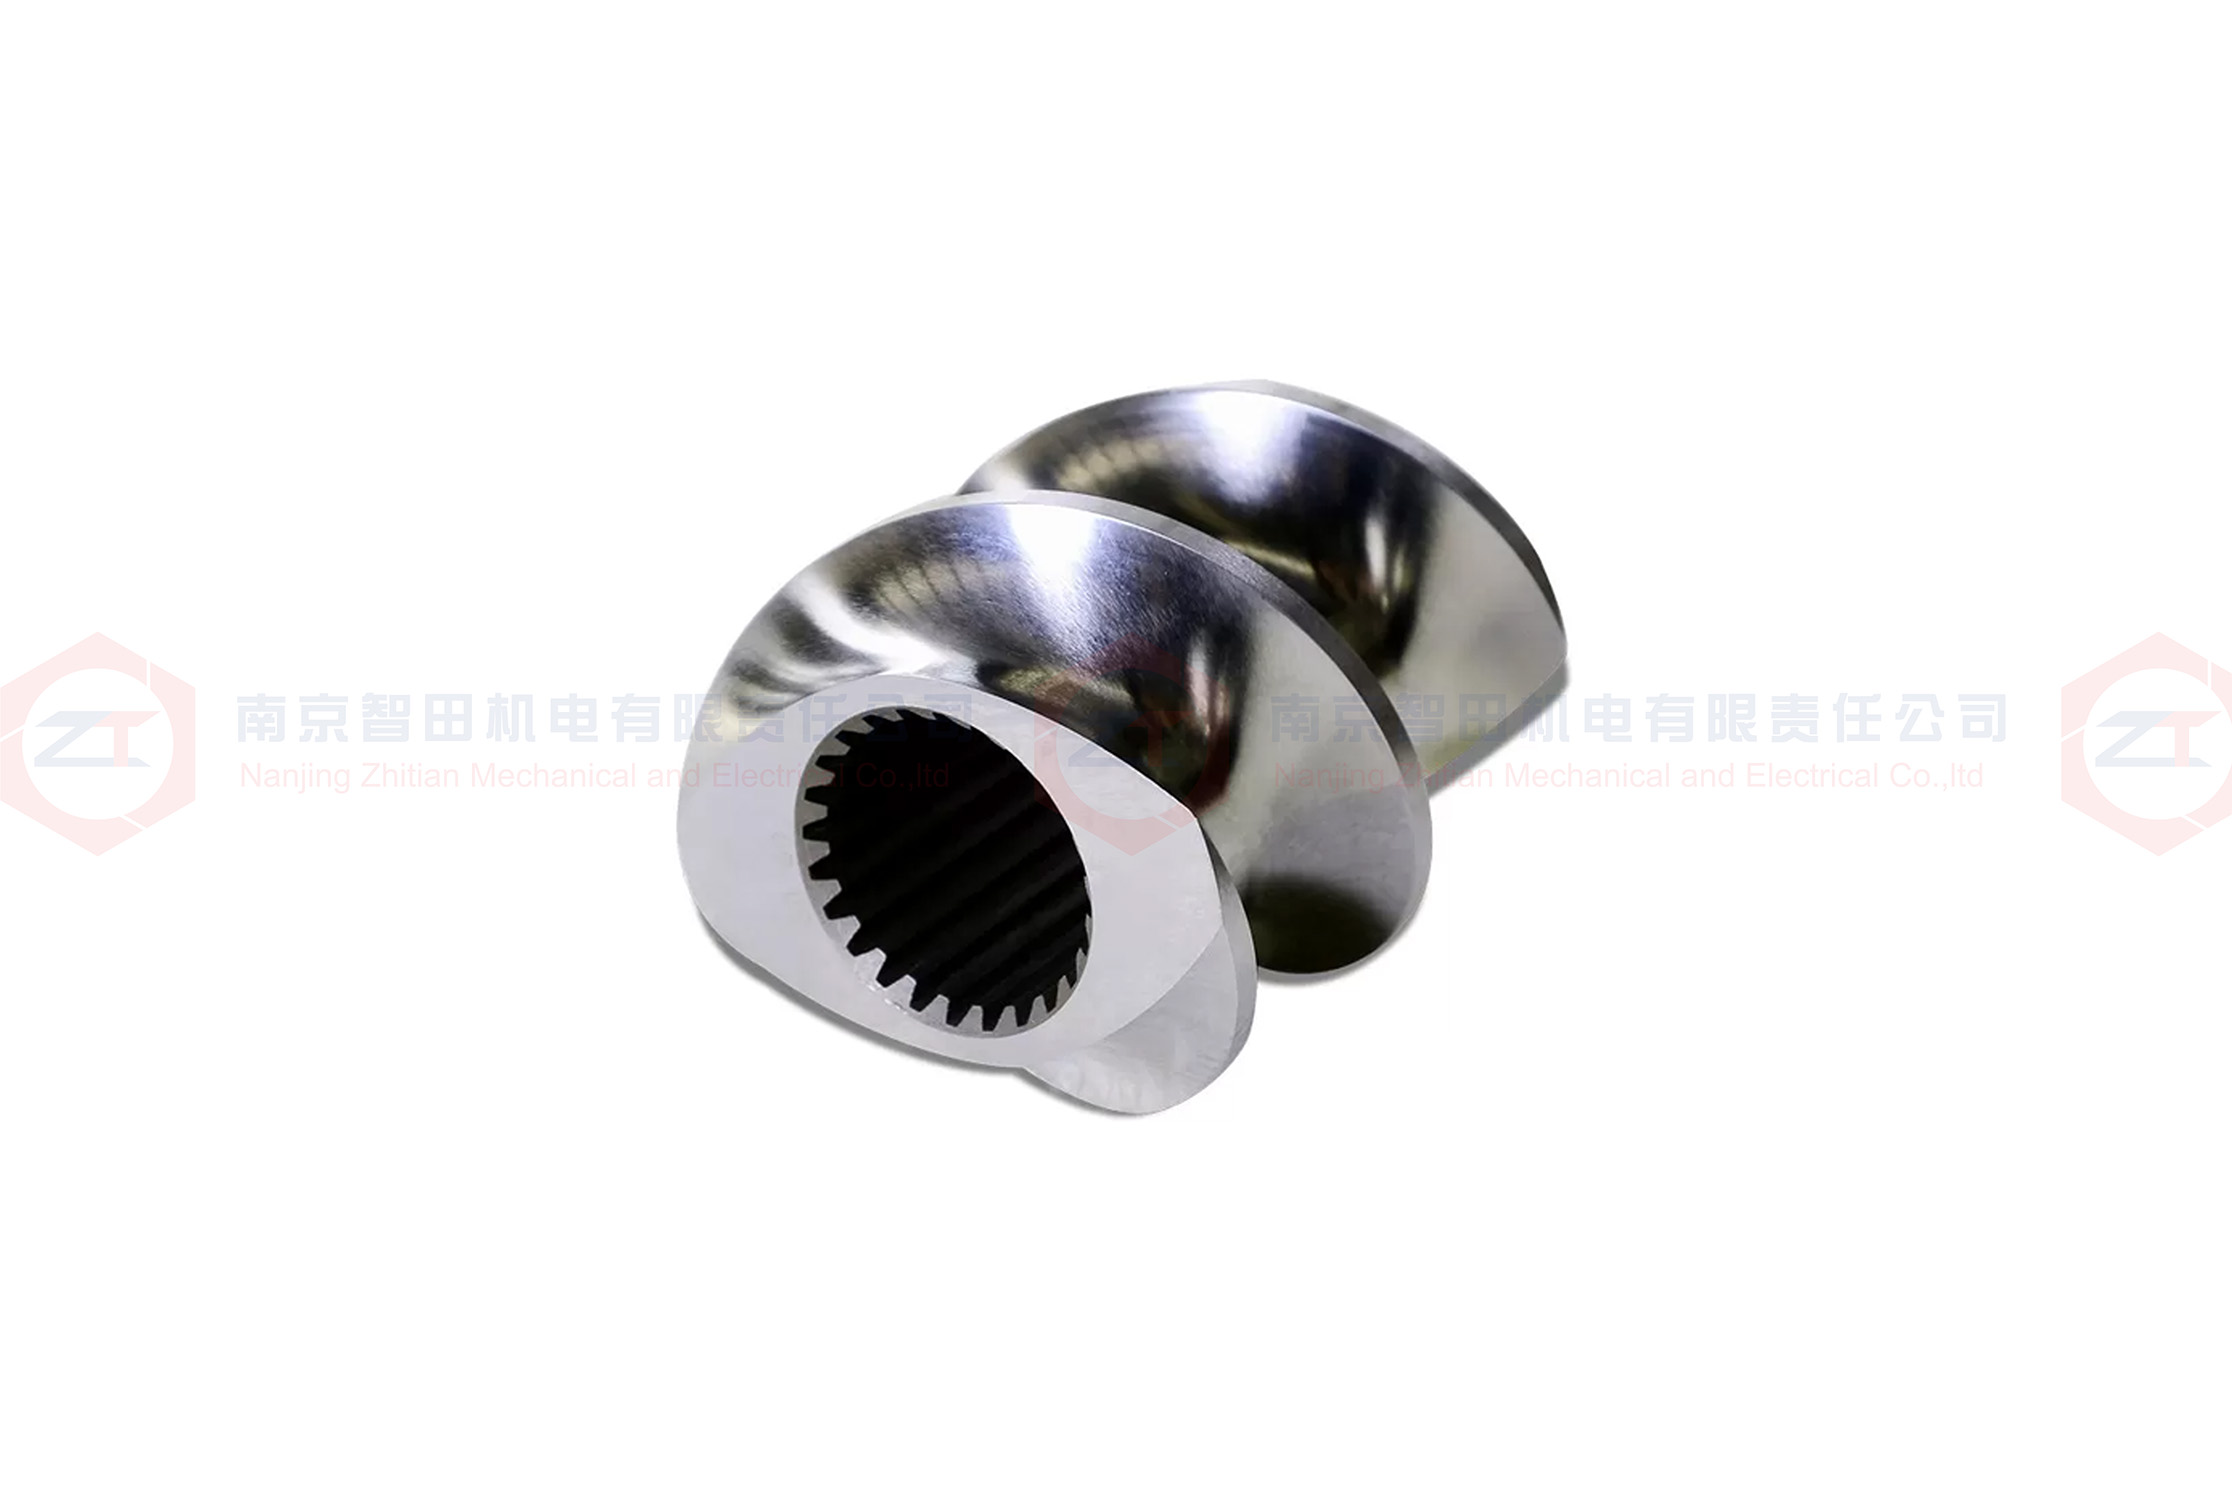 Twin Screw Extruder Elements Type Hip Alloy Steel With Customized Screw L/D Ratio